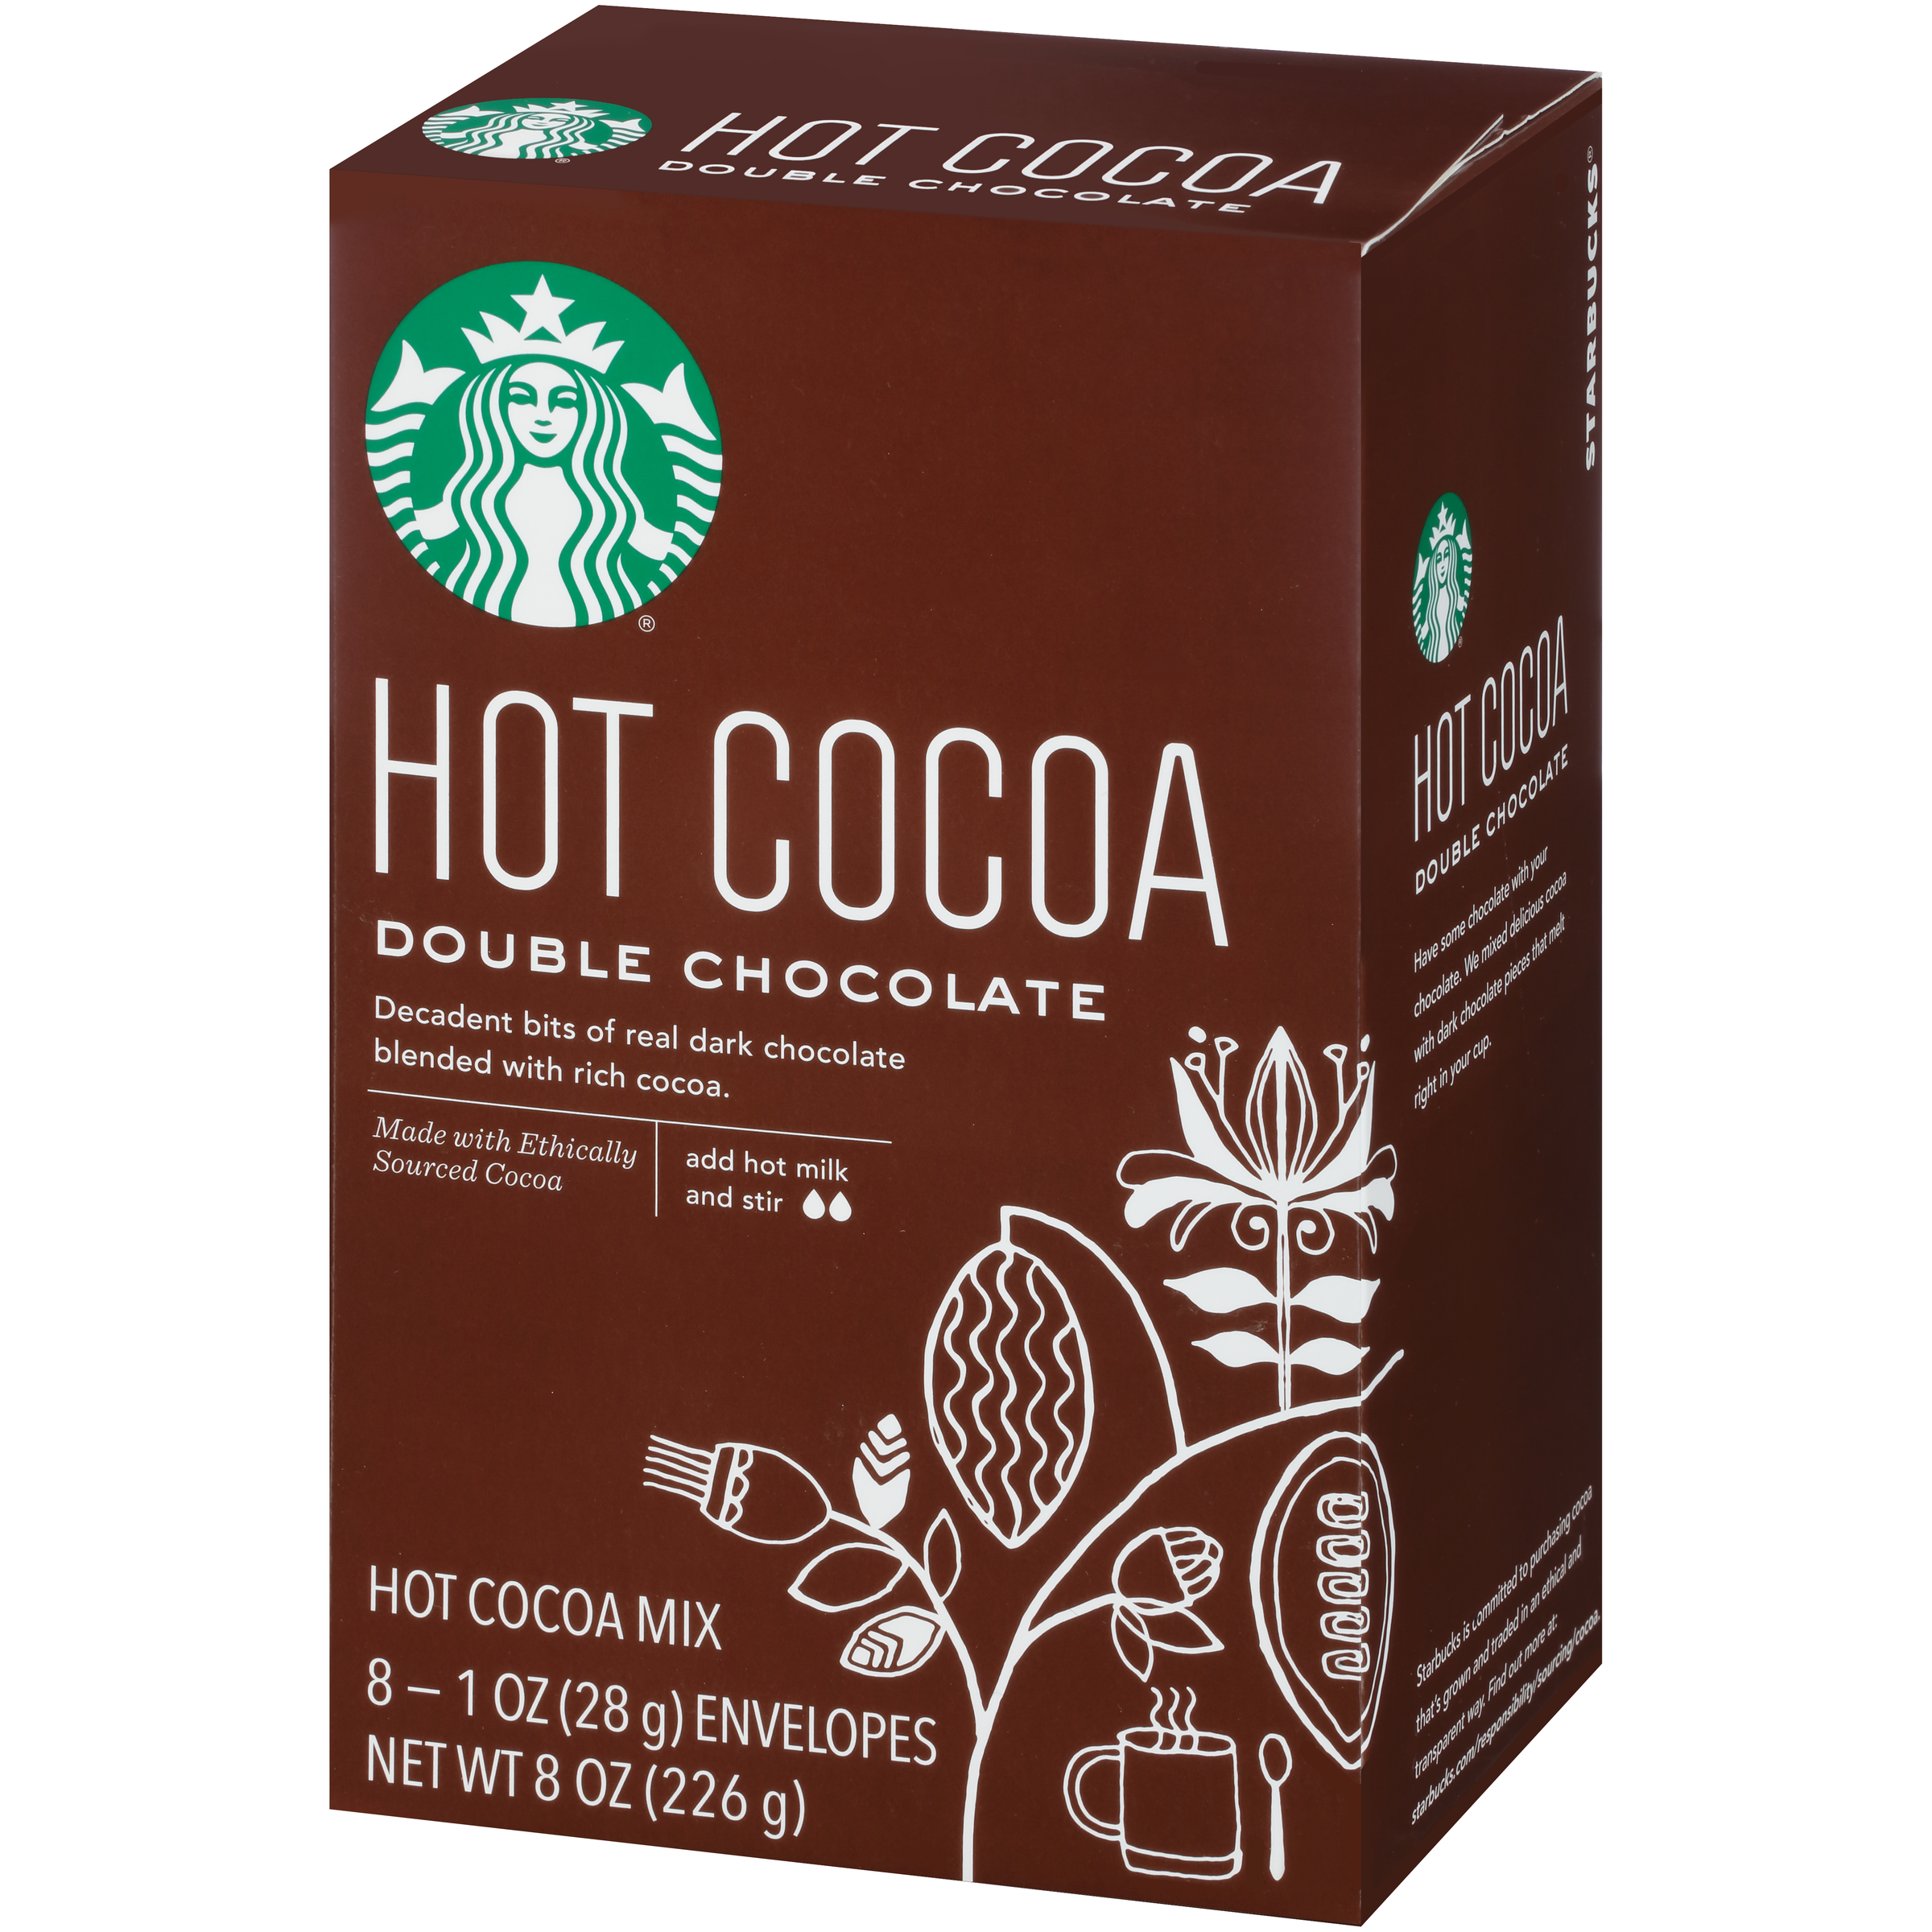 Starbucks Double Chocolate Hot Cocoa Mix, 8 count - image 3 of 9